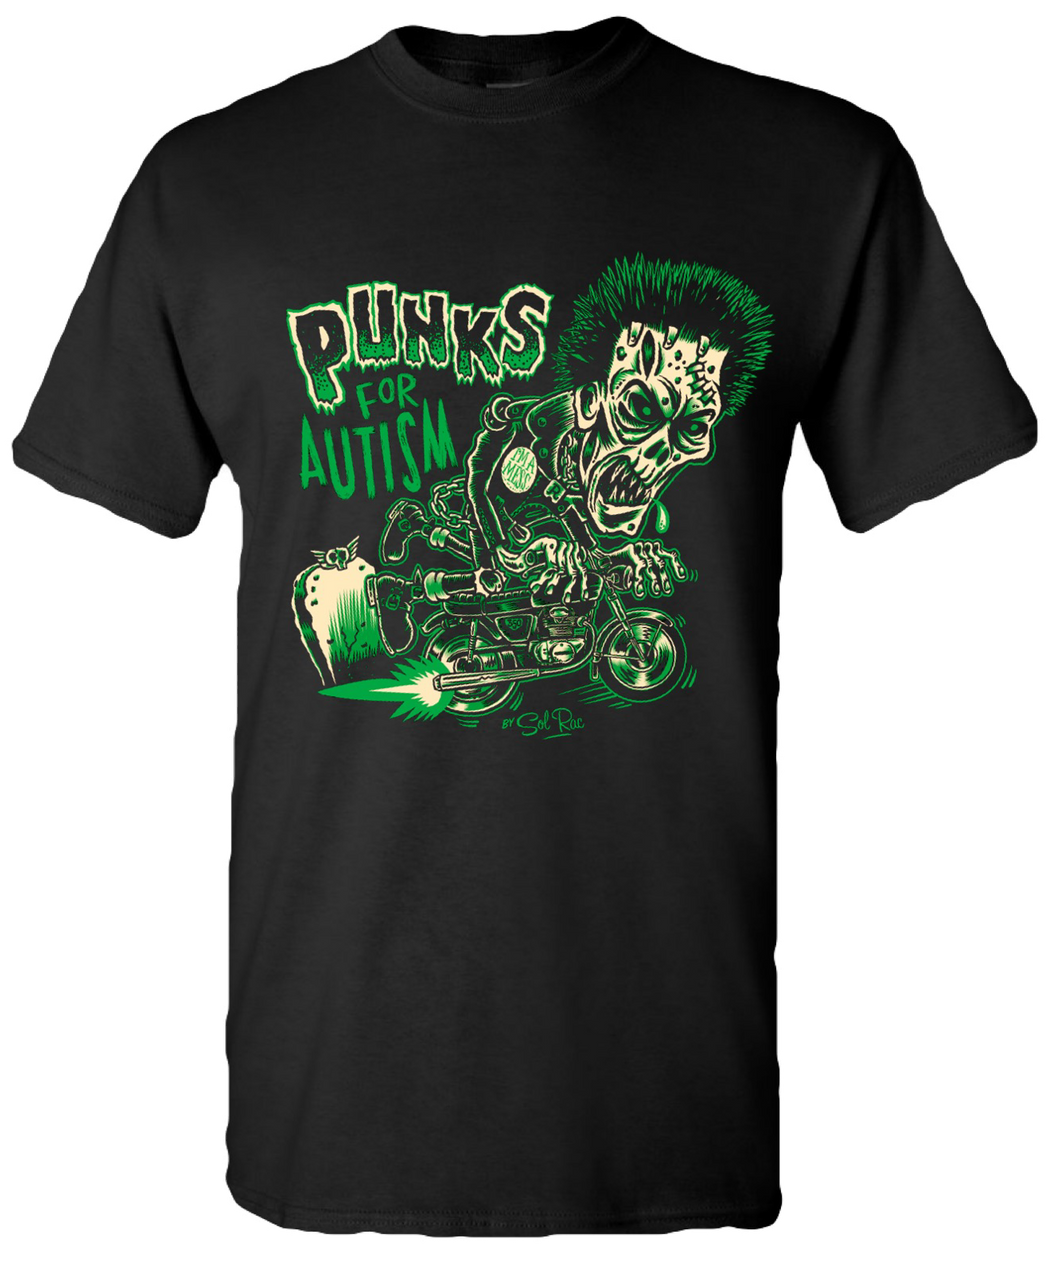 Punks For Autism - Psychobilly - Short Sleeves